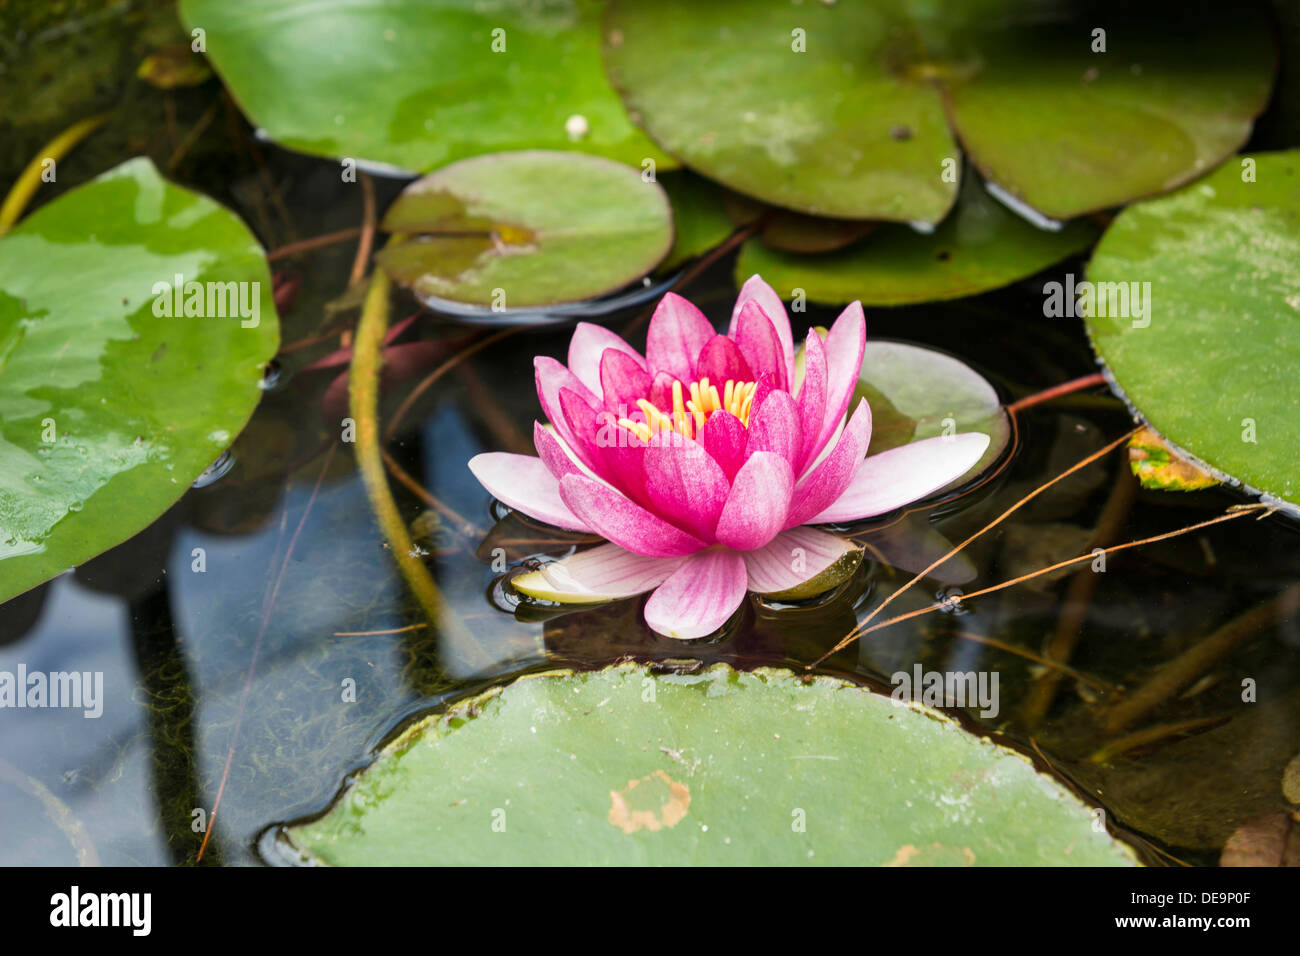 Pink lily in a pond with its green pads Stock Photo